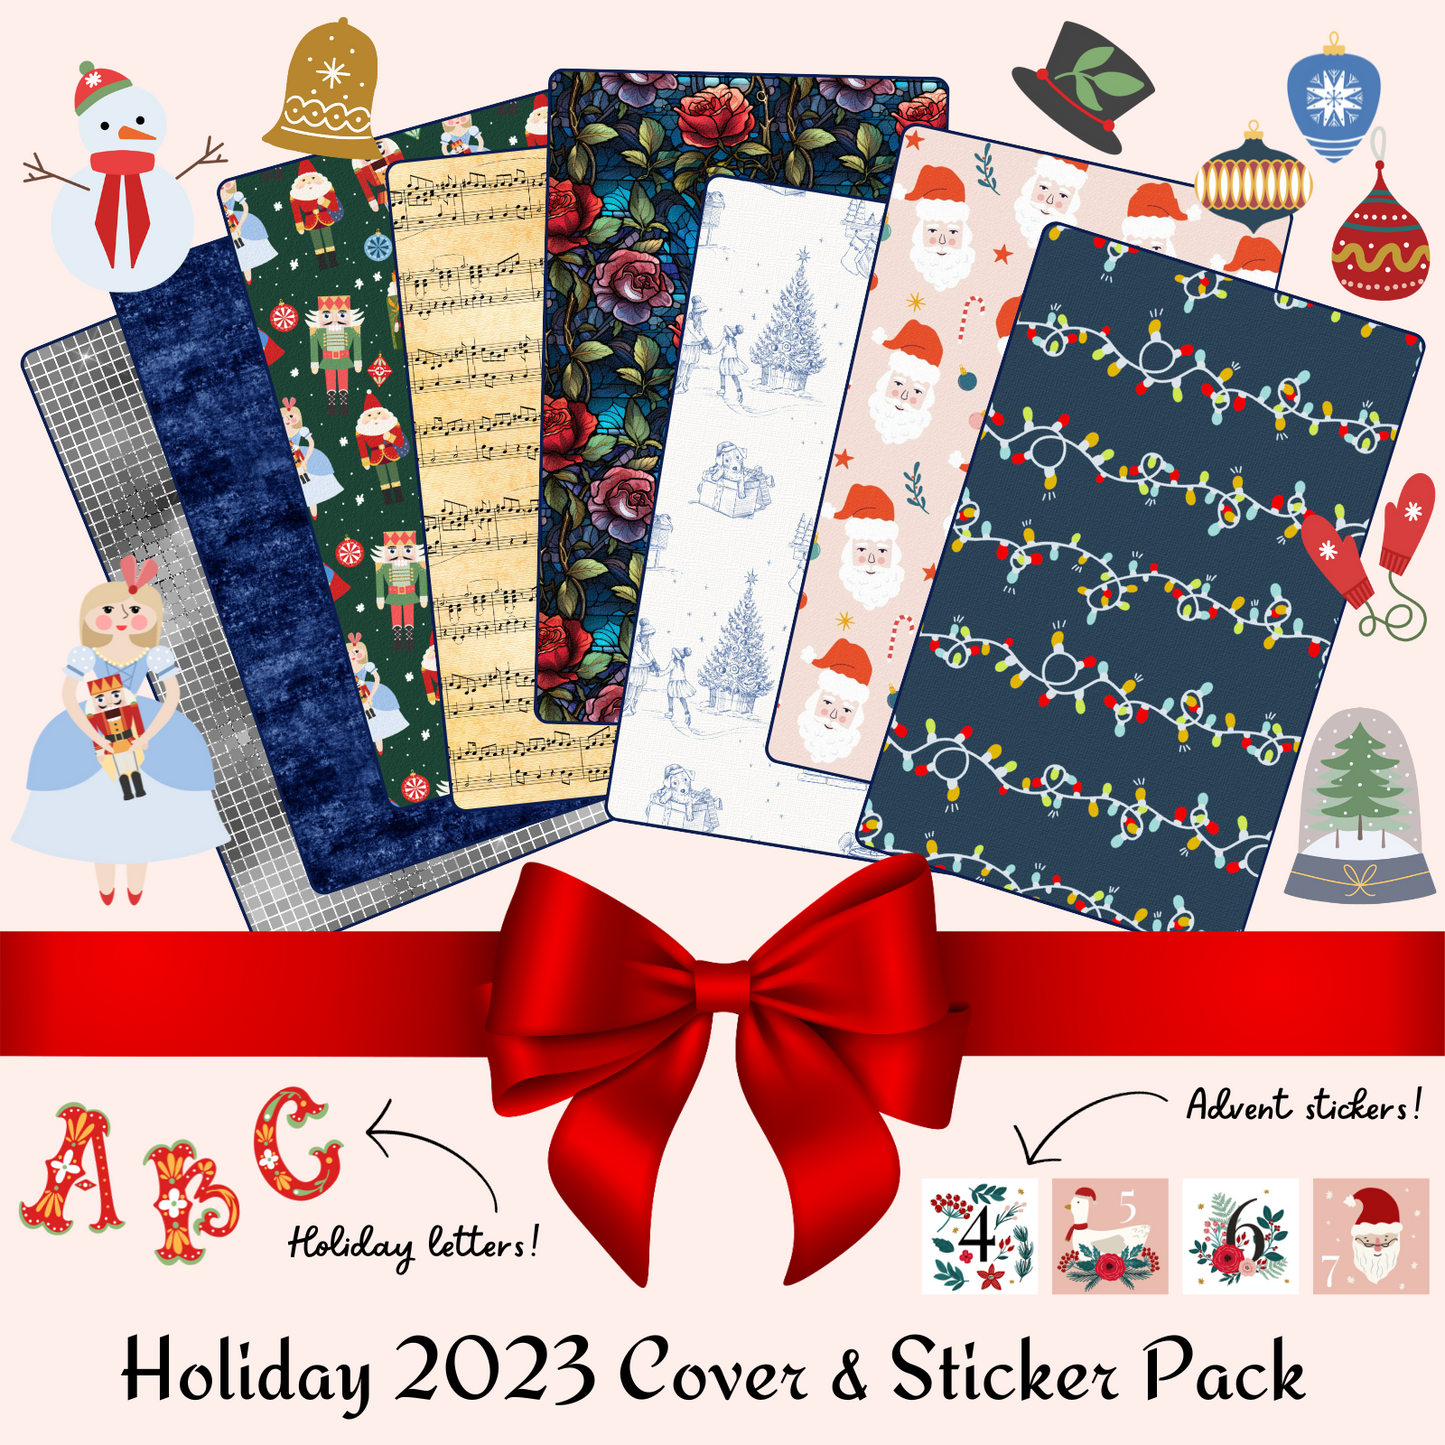 "Artful Holiday 2023" Cover and Sticker Pack